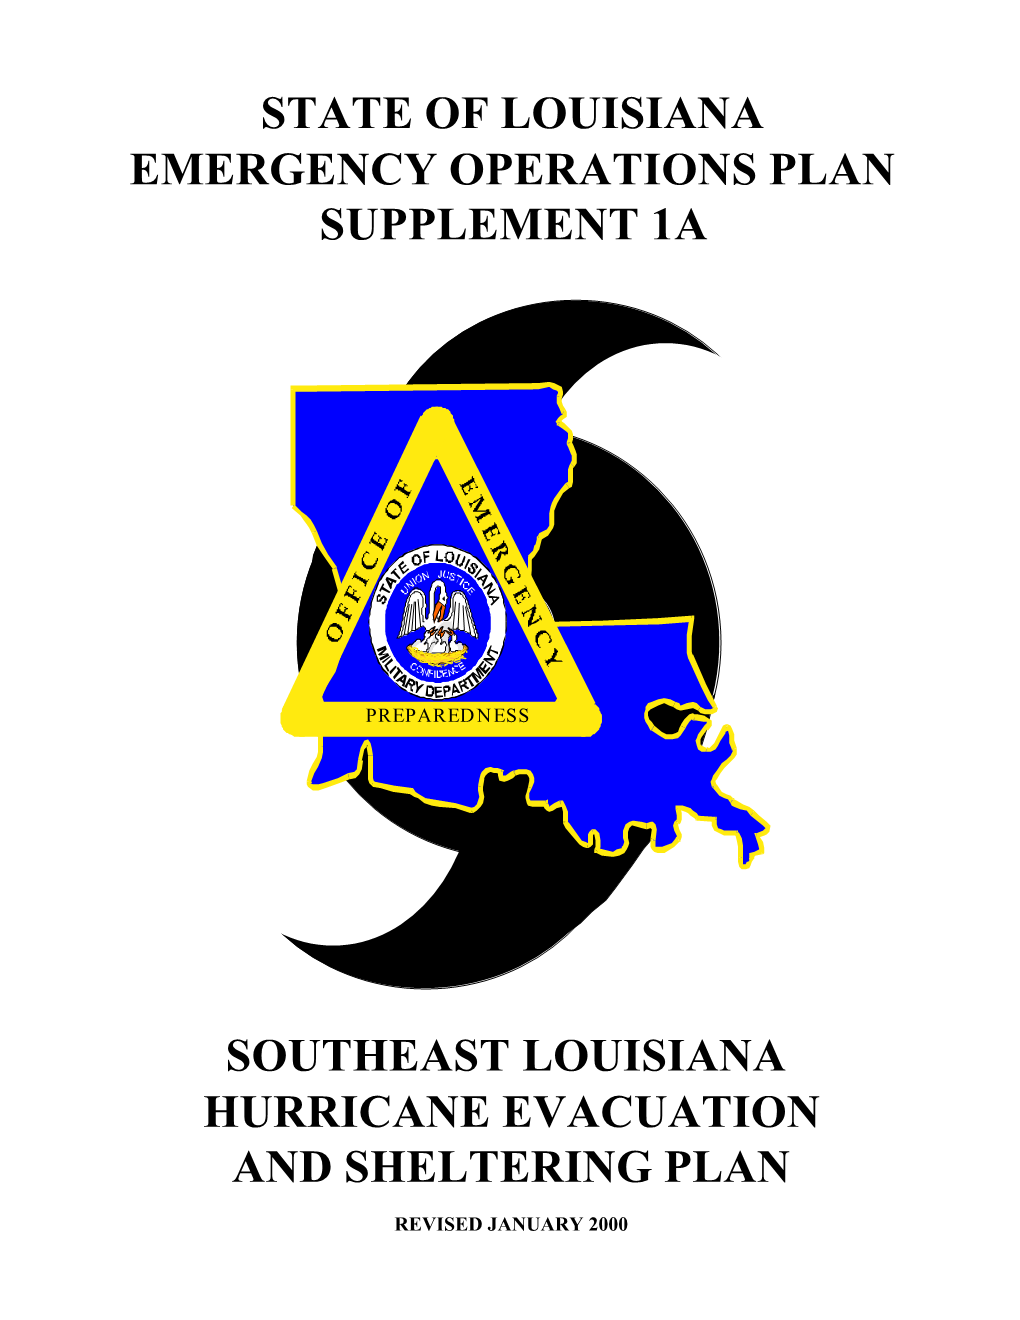 State of Louisiana Emergency Operations Plan Supplement 1A